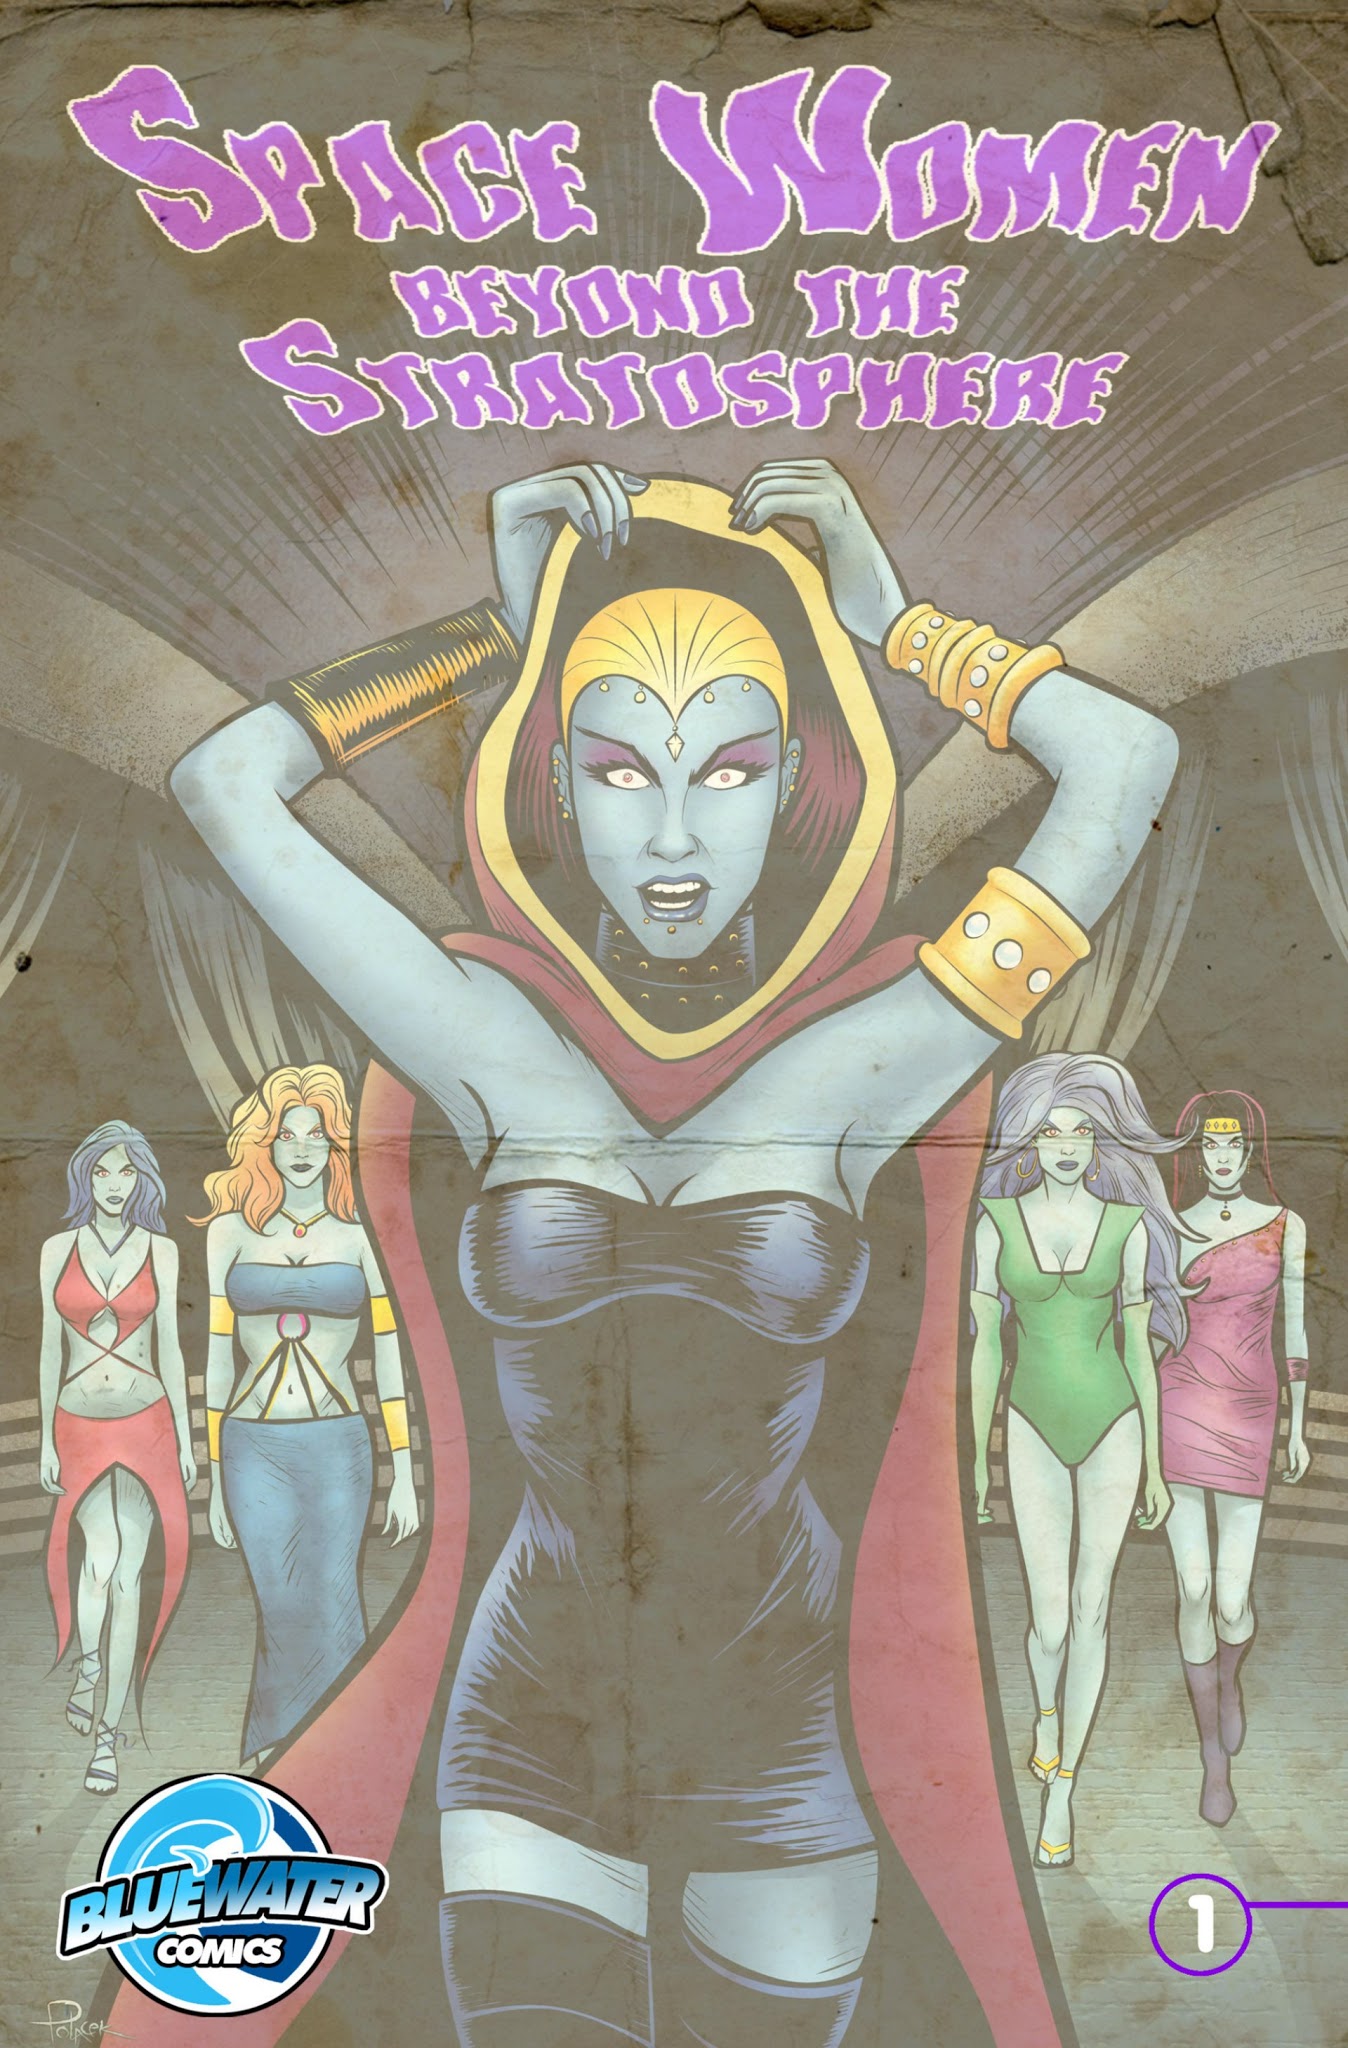 Read online Space Women Beyond the Stratosphere comic -  Issue # TPB - 3